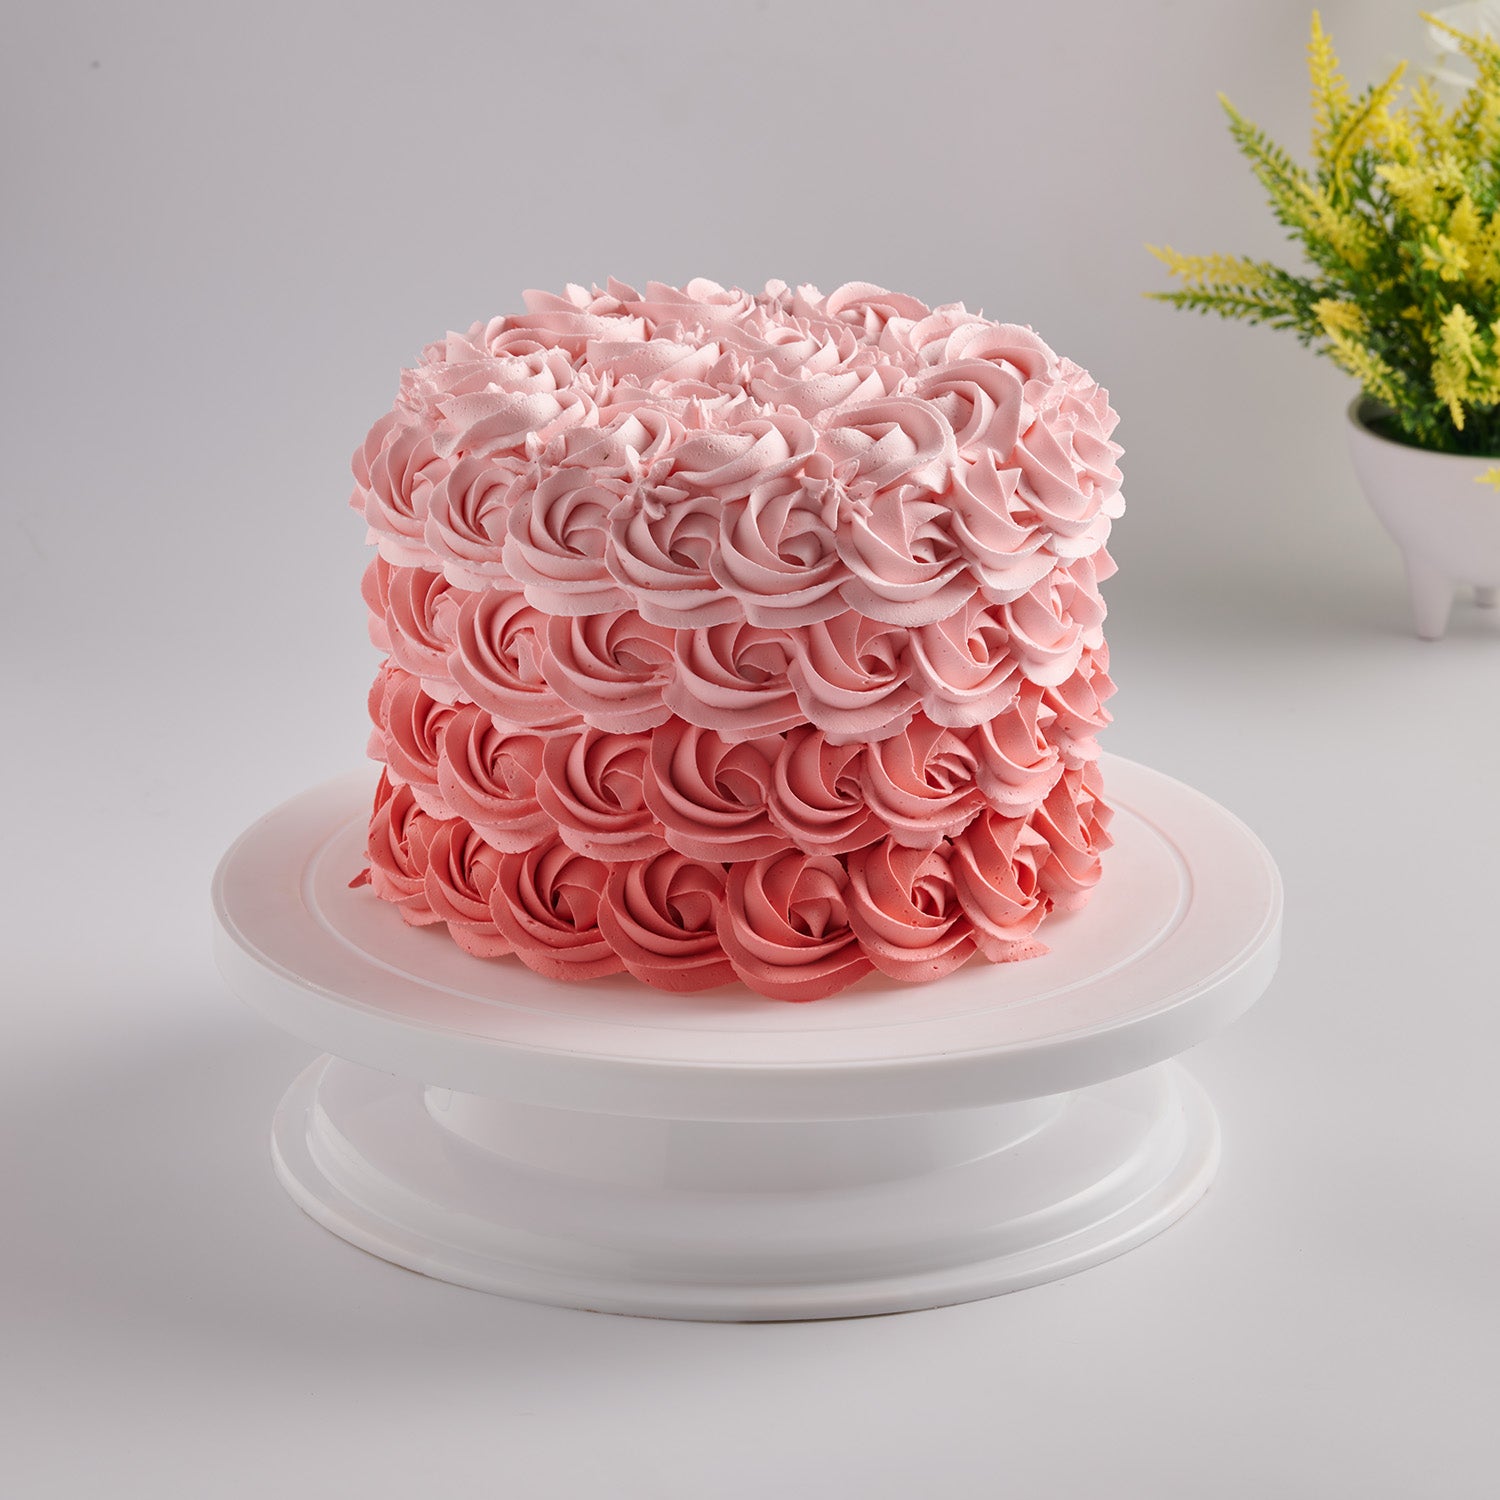 Flower Cake - Edible Perfections